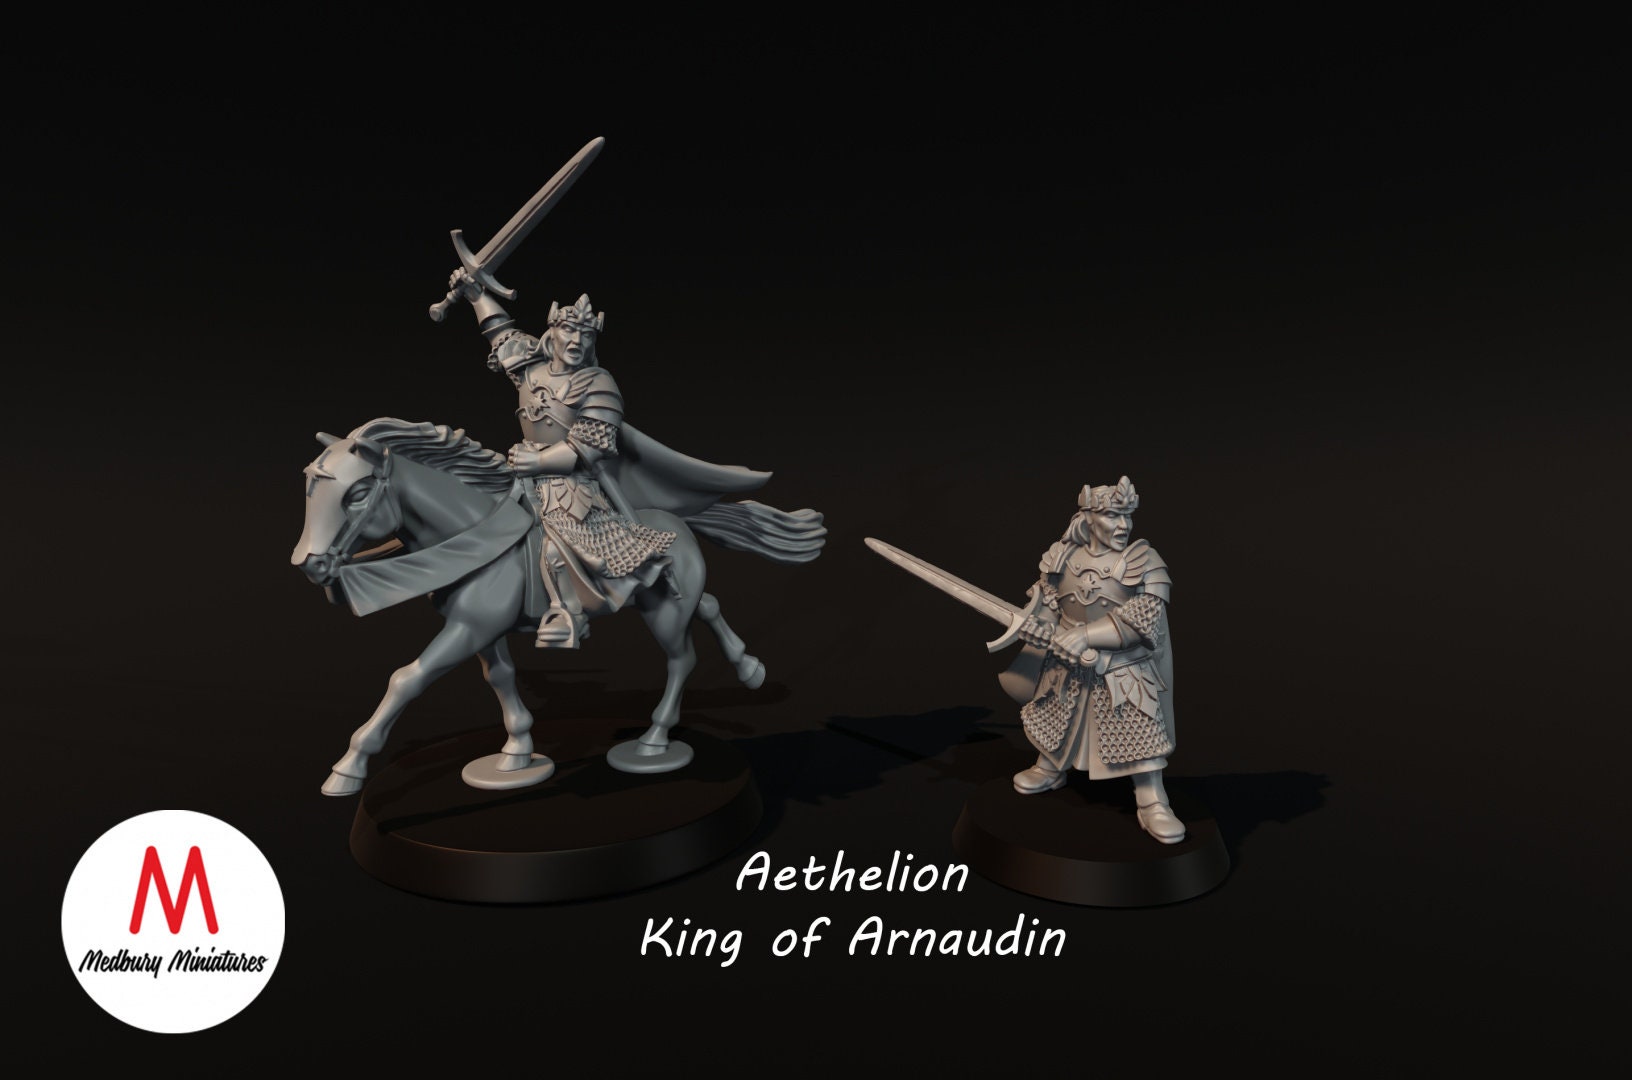 Aethelion King of Arnaudin, and Captain